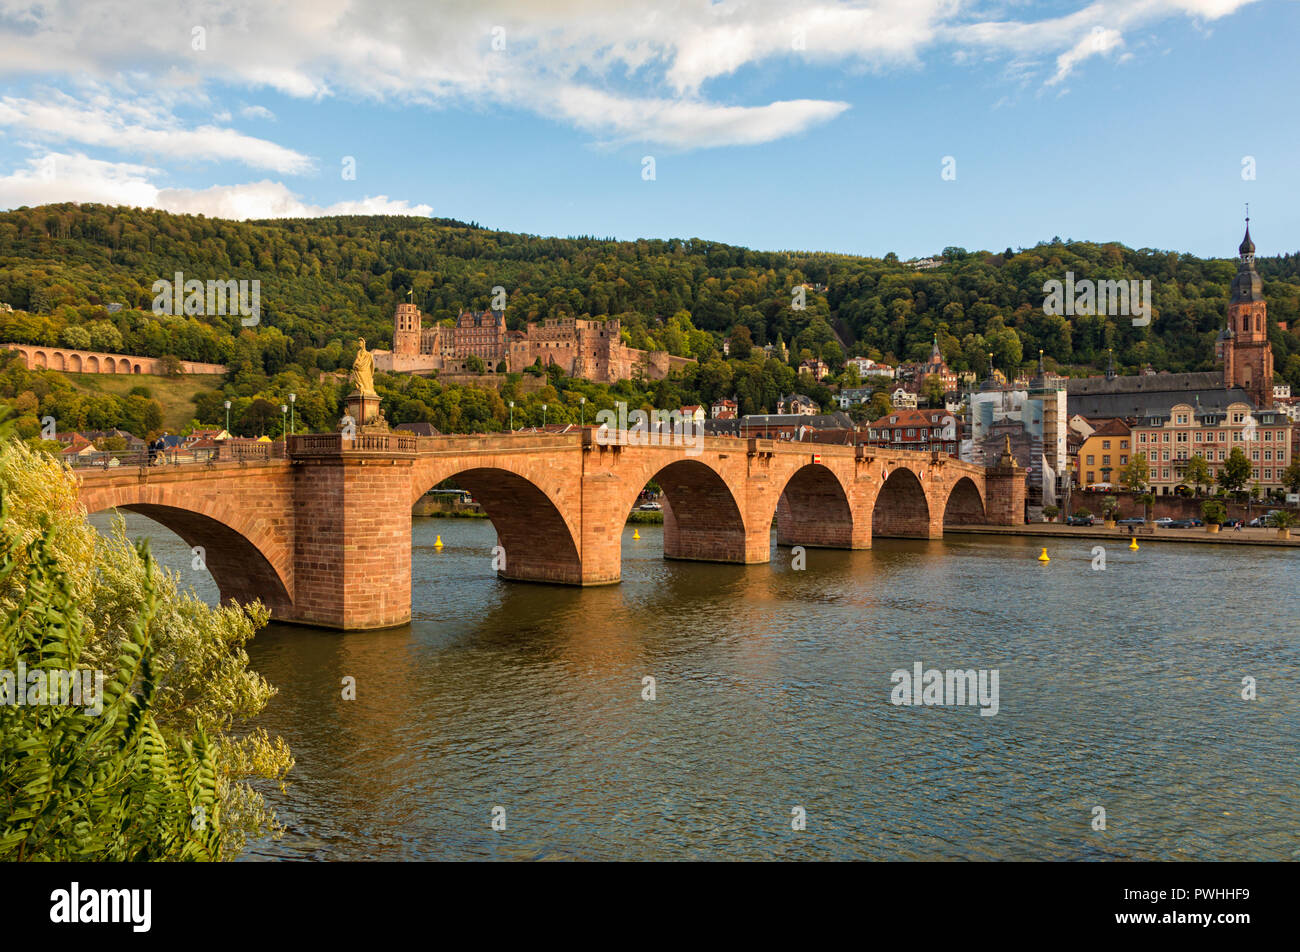 Old Bridge across Neckar river, ruins of the castle and the old town of Heidelberg, Germany Stock Photo